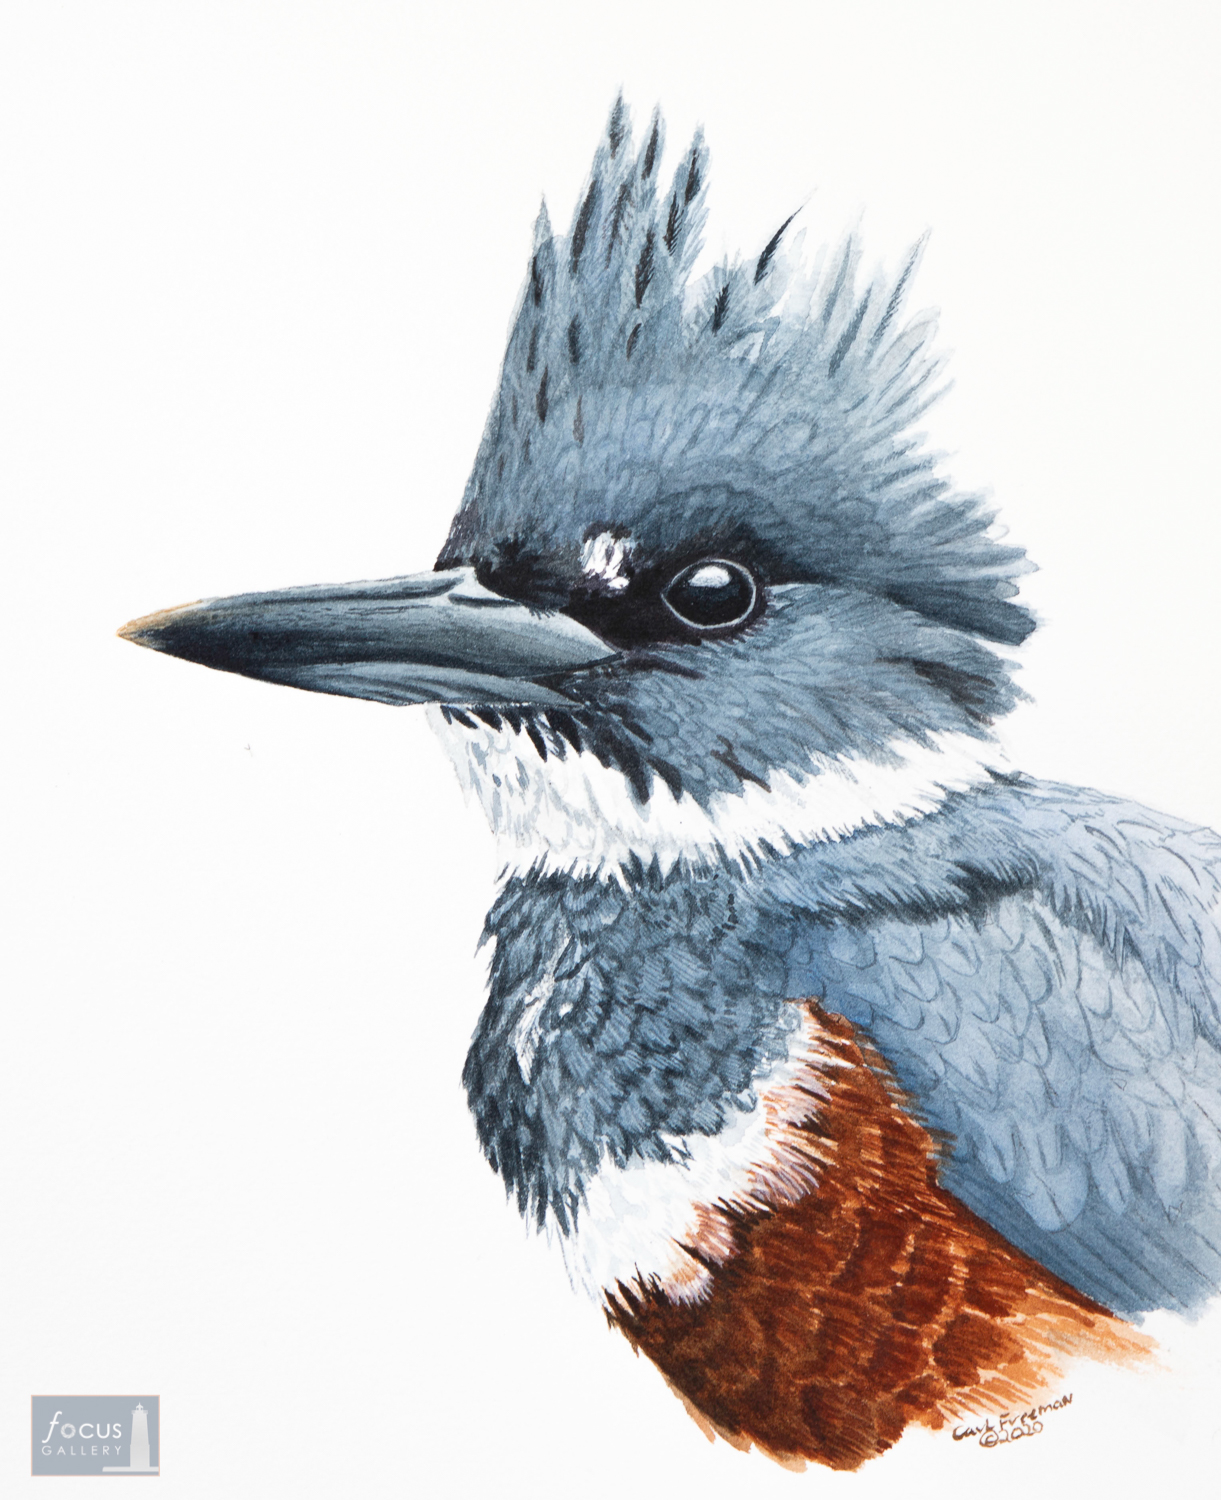 Original watercolor painting of the detail of a Belted Kingfisher's head.